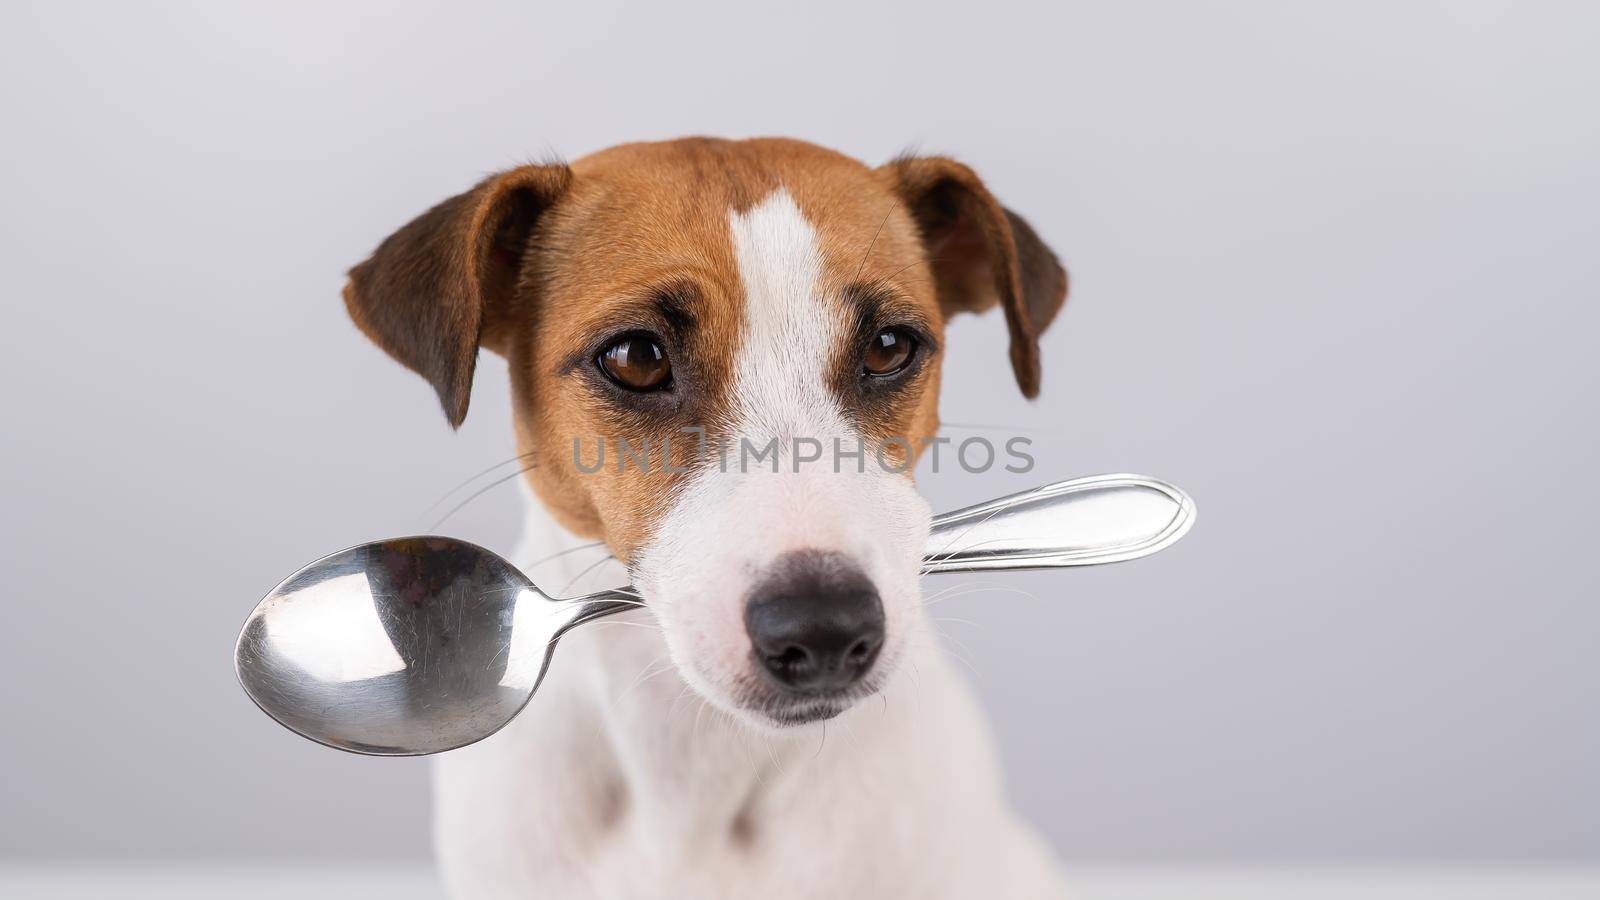 Close-up portrait of a dog Jack Russell Terrier holding a spoon in his mouth on a white background